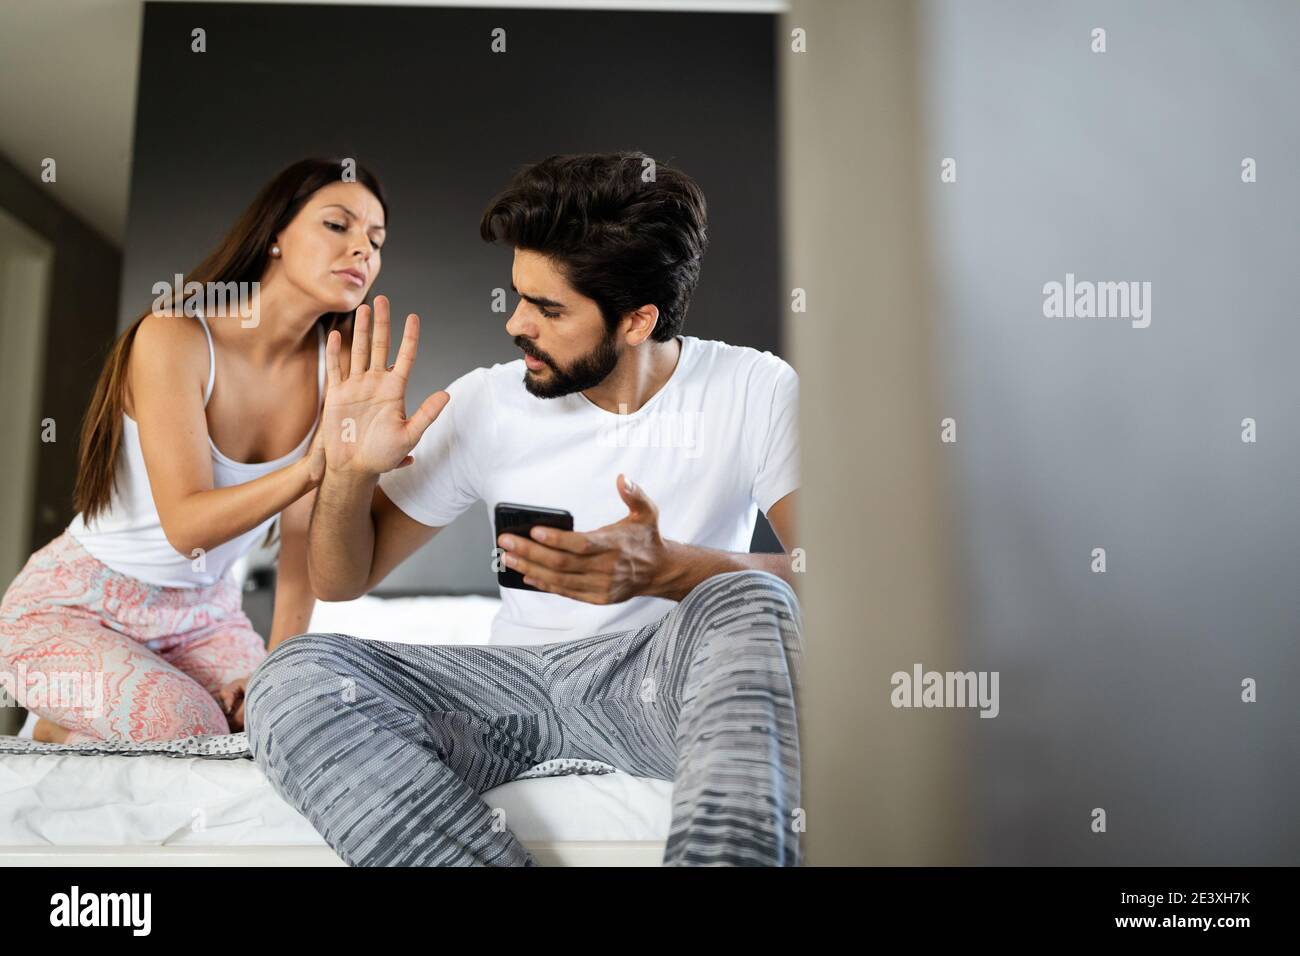 Jealous wife spying her husband mobile phone Stock Photo